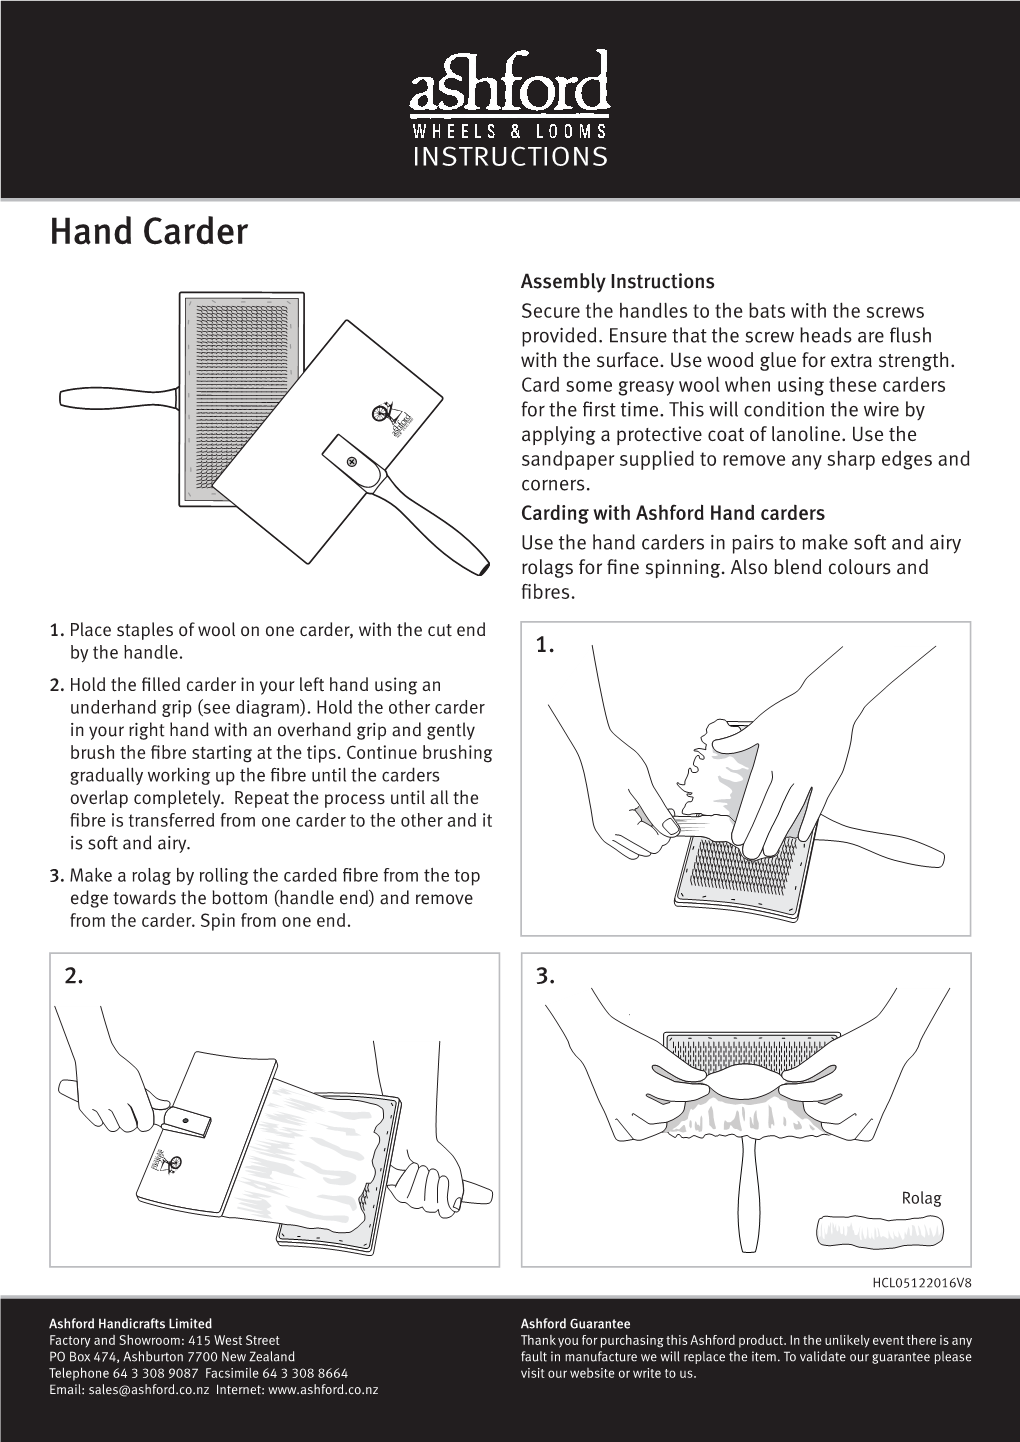 Hand Carder Assembly Instructions Secure the Handles to the Bats with the Screws Provided